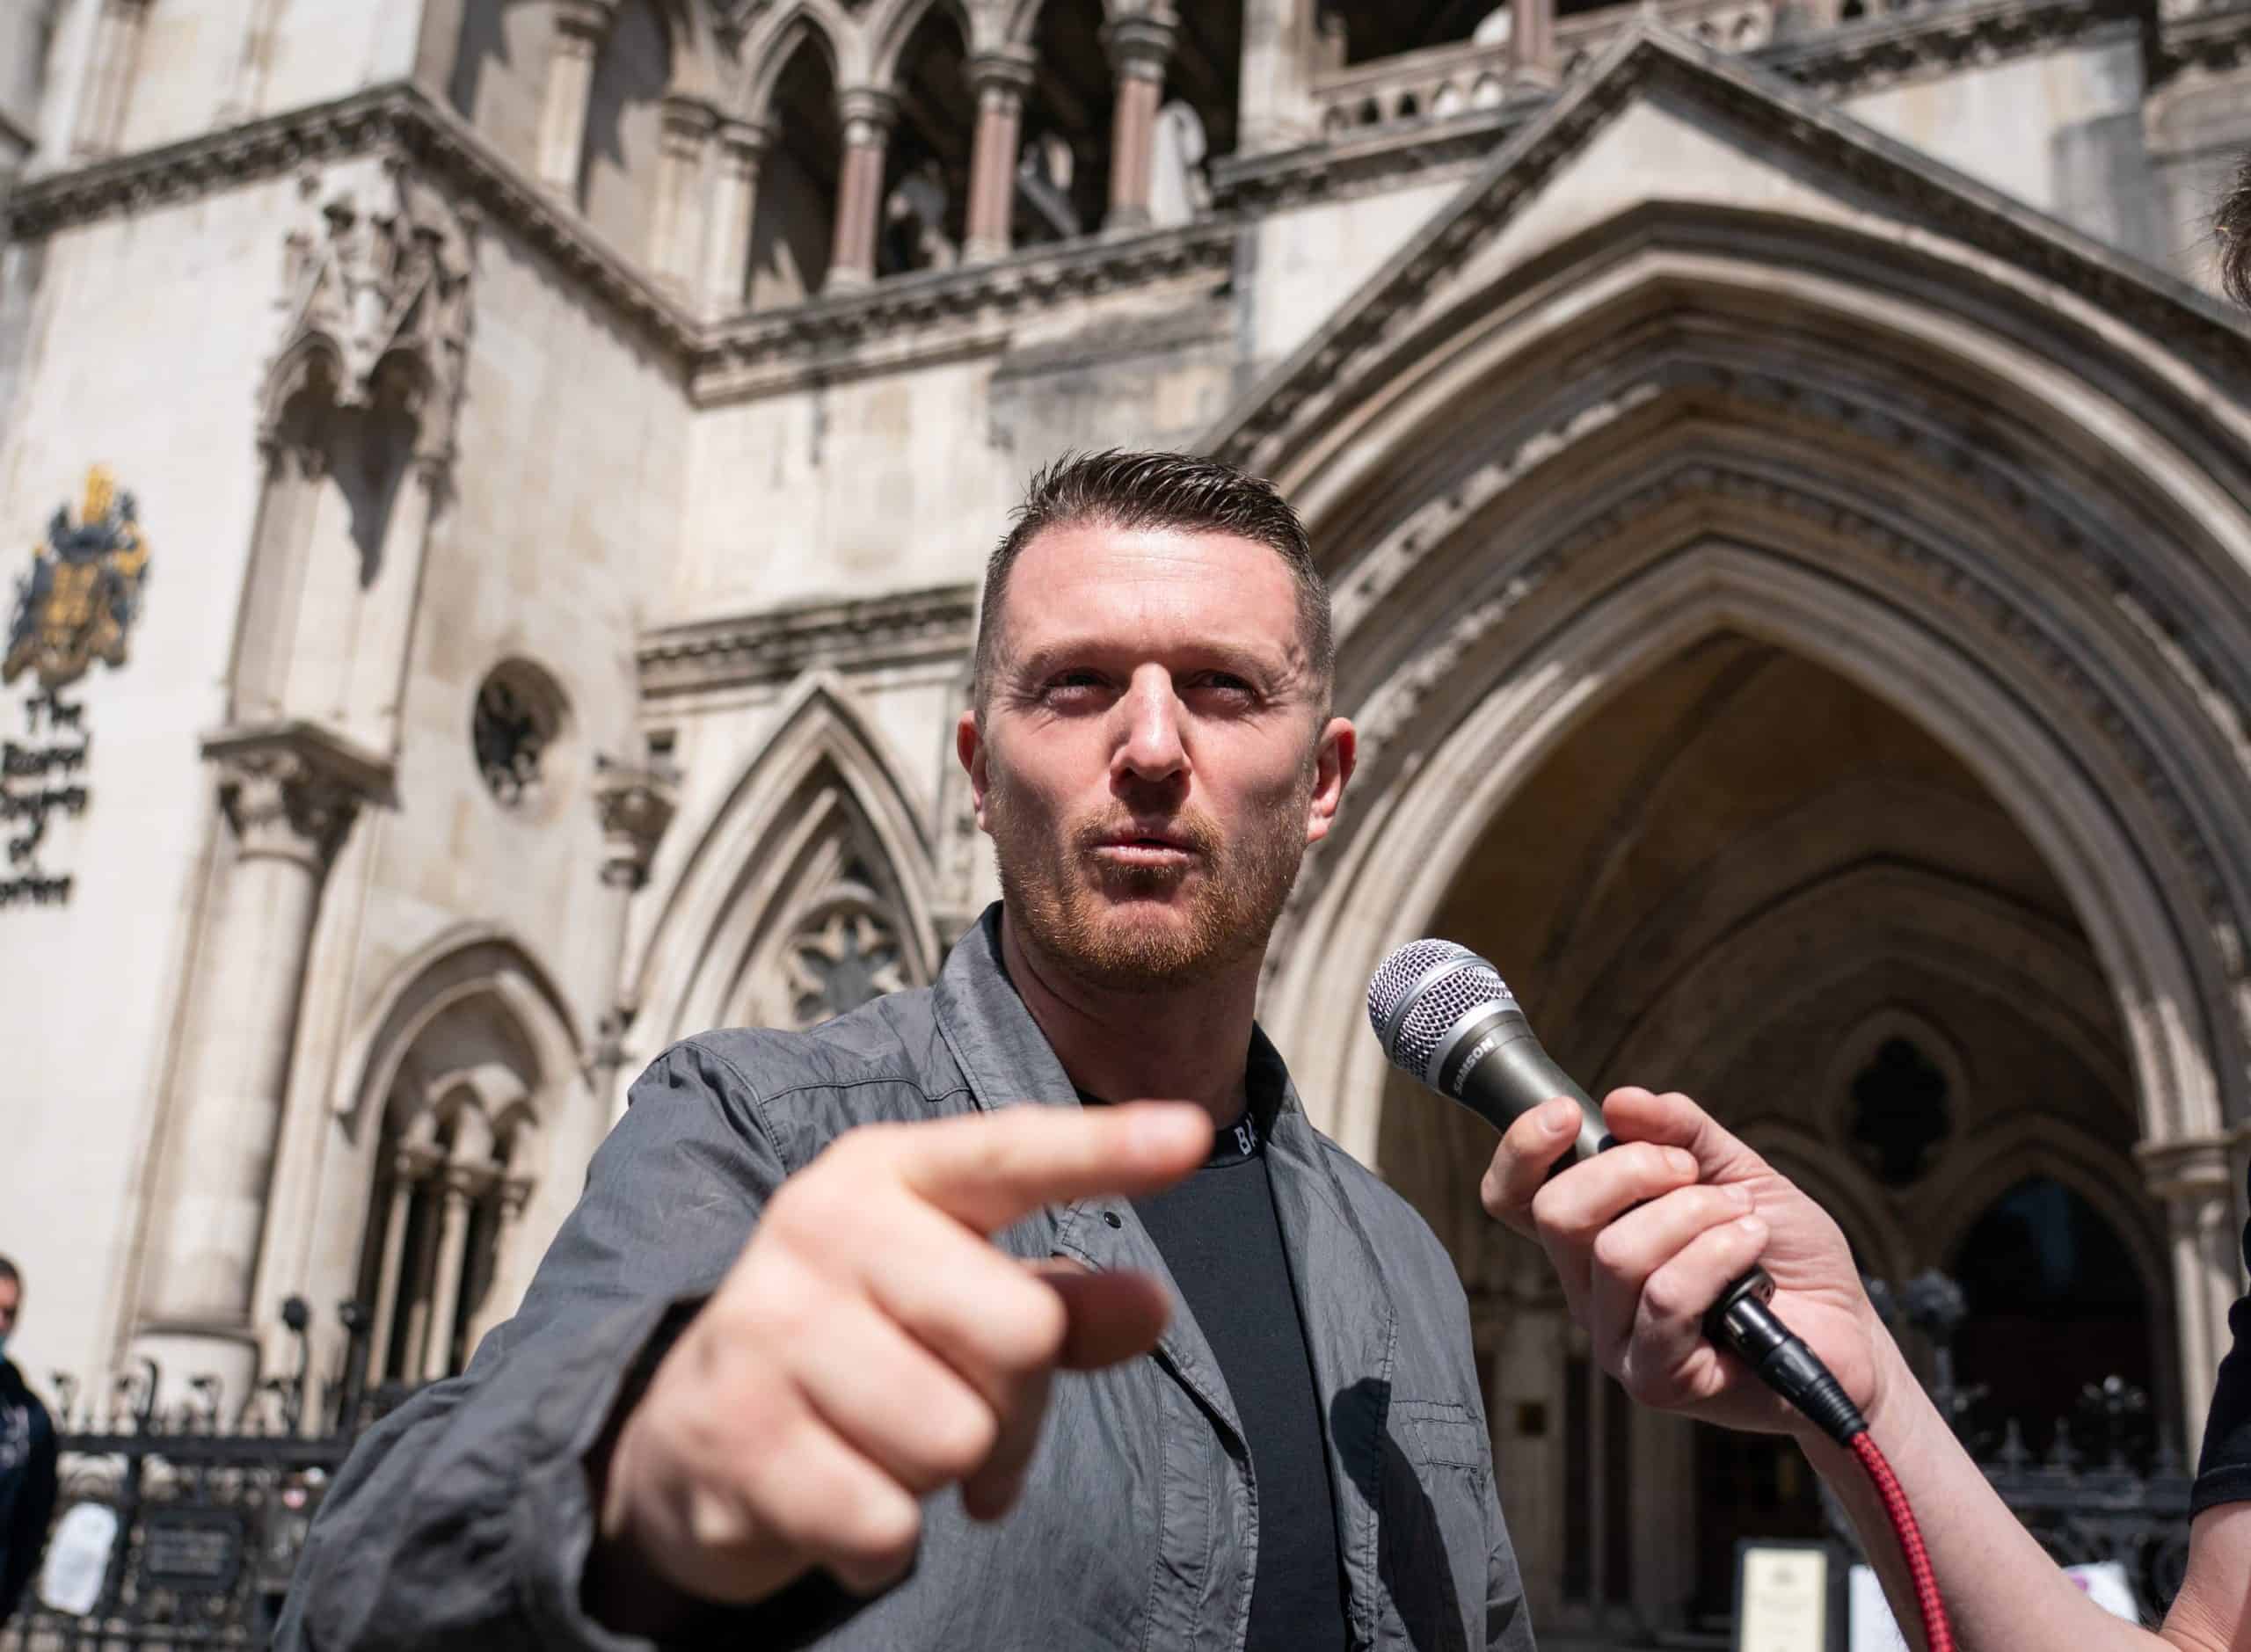 Tommy Robinson missed court date over finances ‘because of mental health issues’